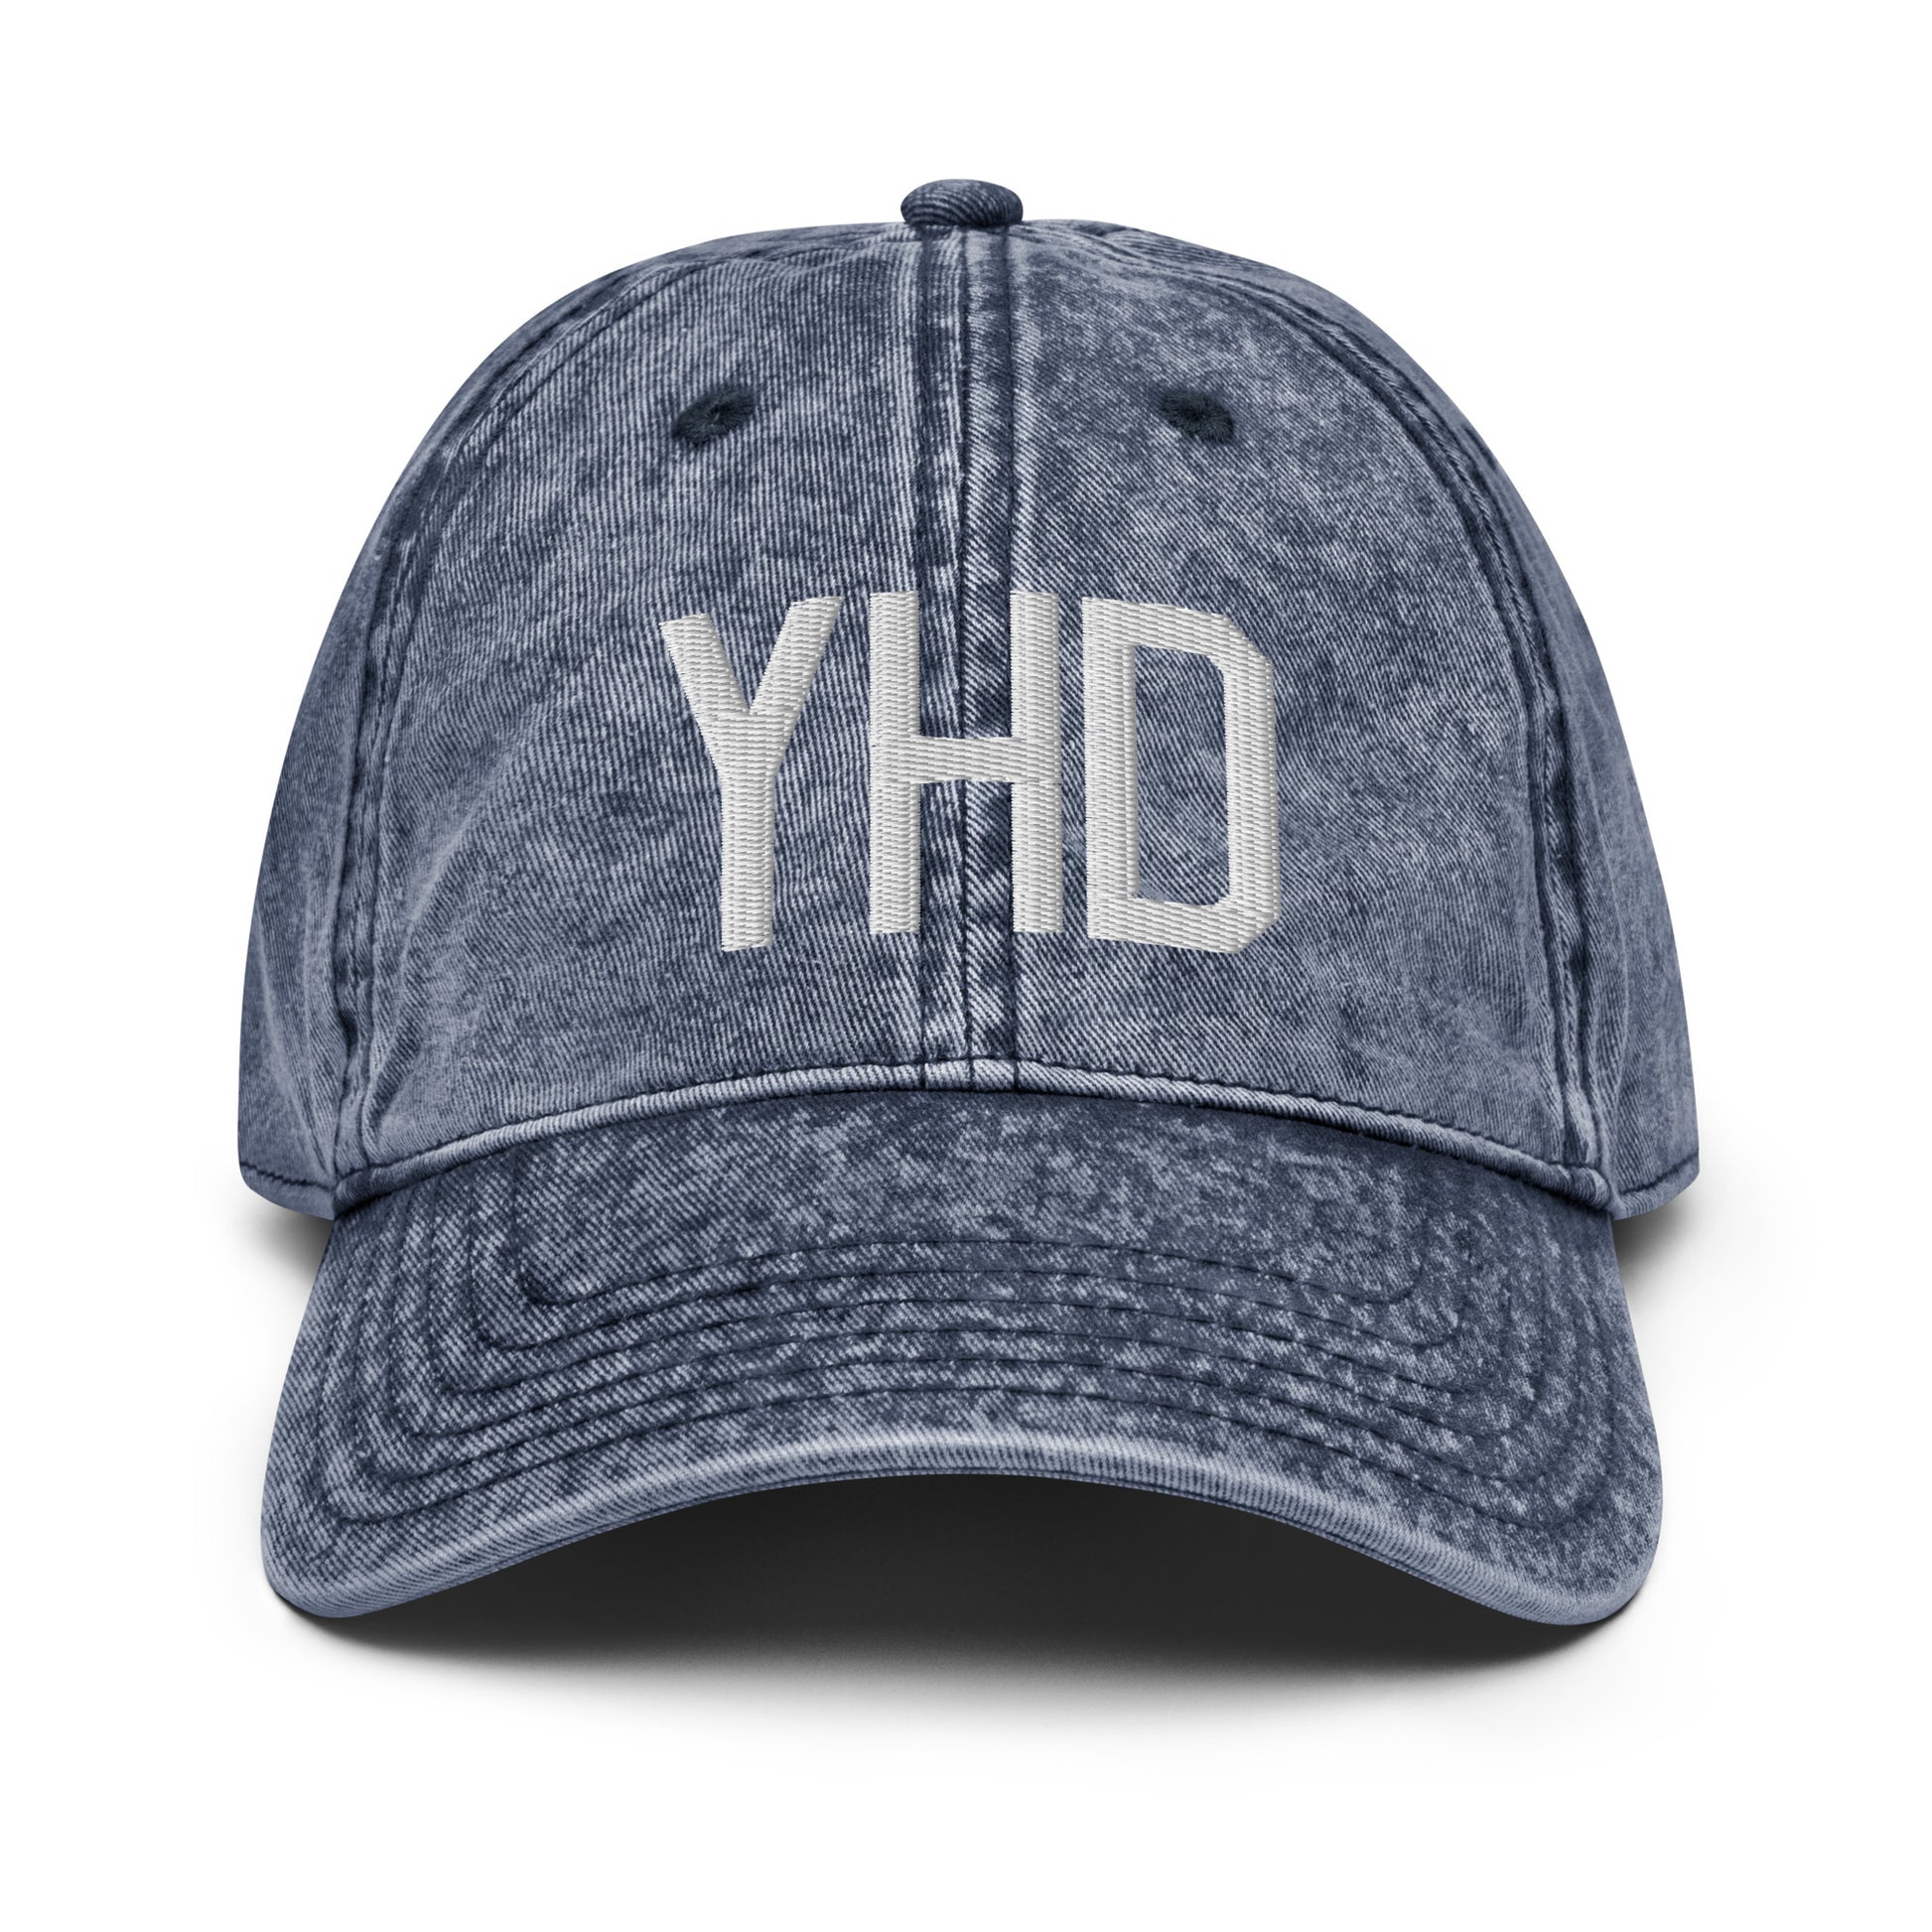 Airport Code Twill Cap - White • YHD Dryden • YHM Designs - Image 16